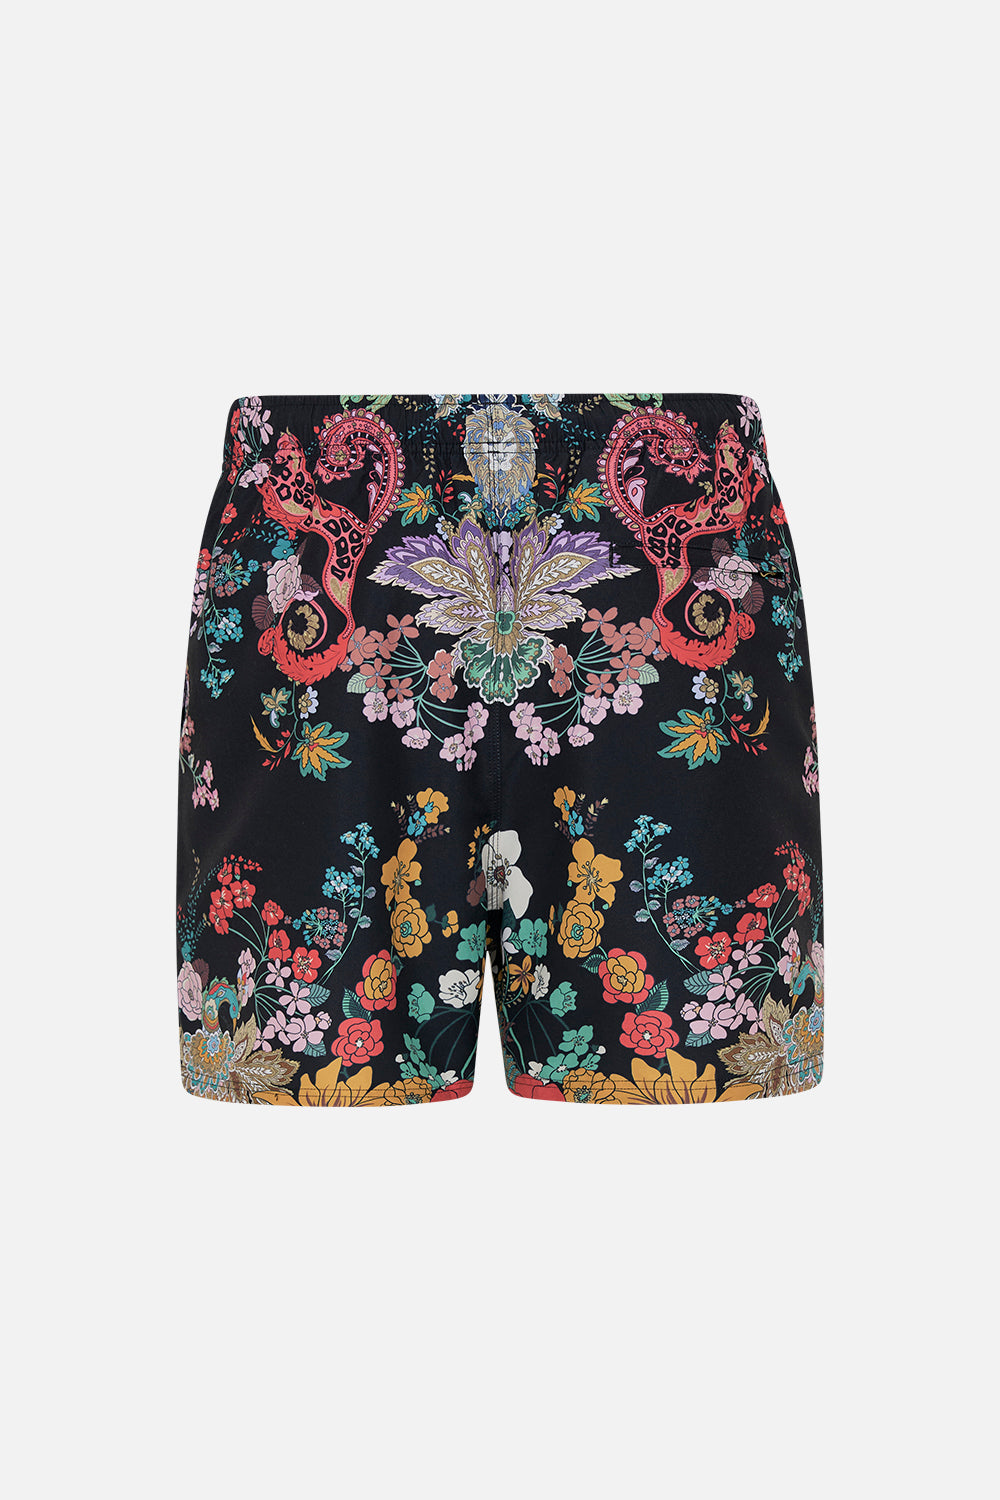 Hotel Franks by CAMILLA mens black floral print boardshort on We Wore Folklore print